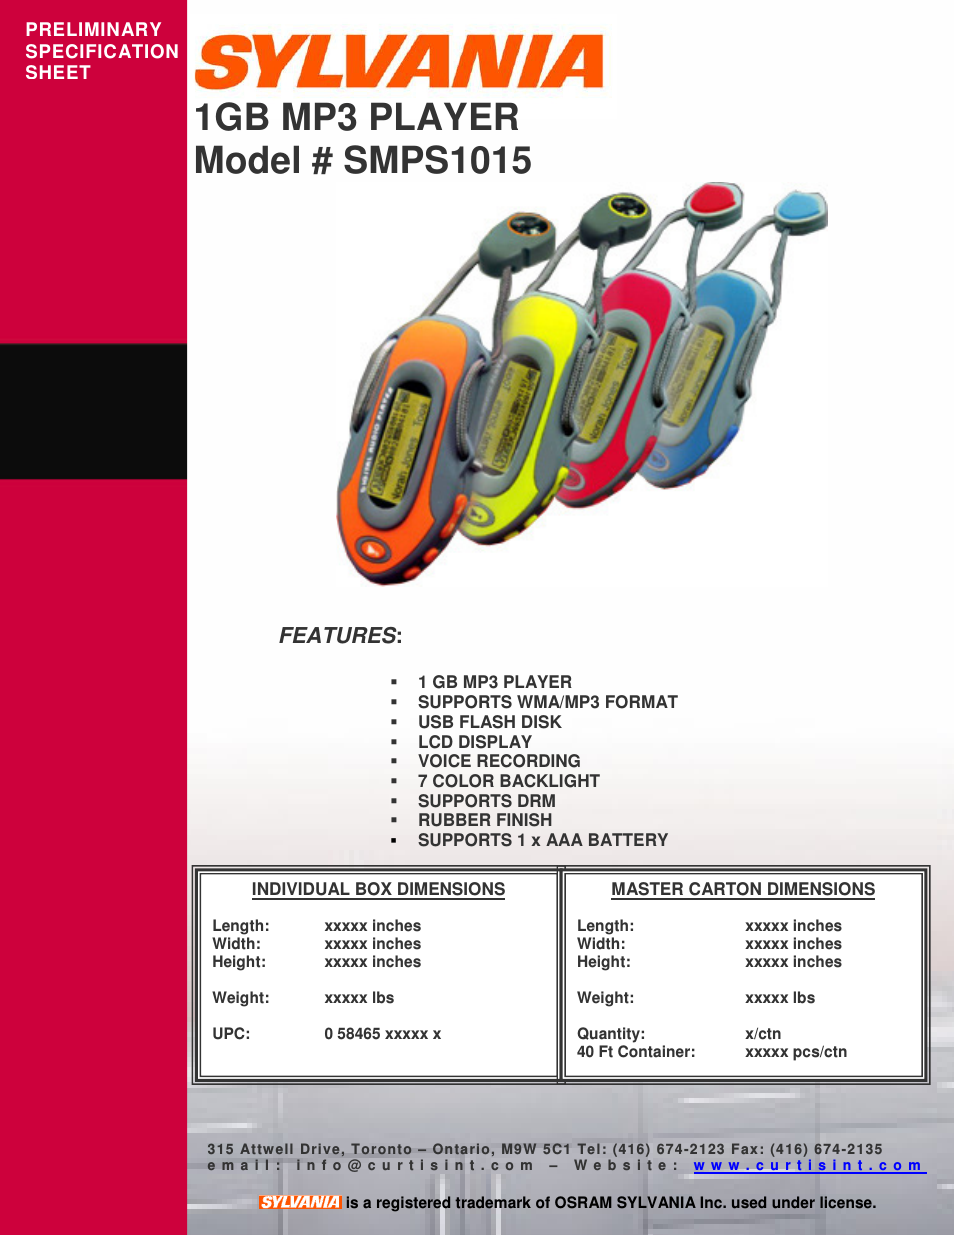 SMPS1015